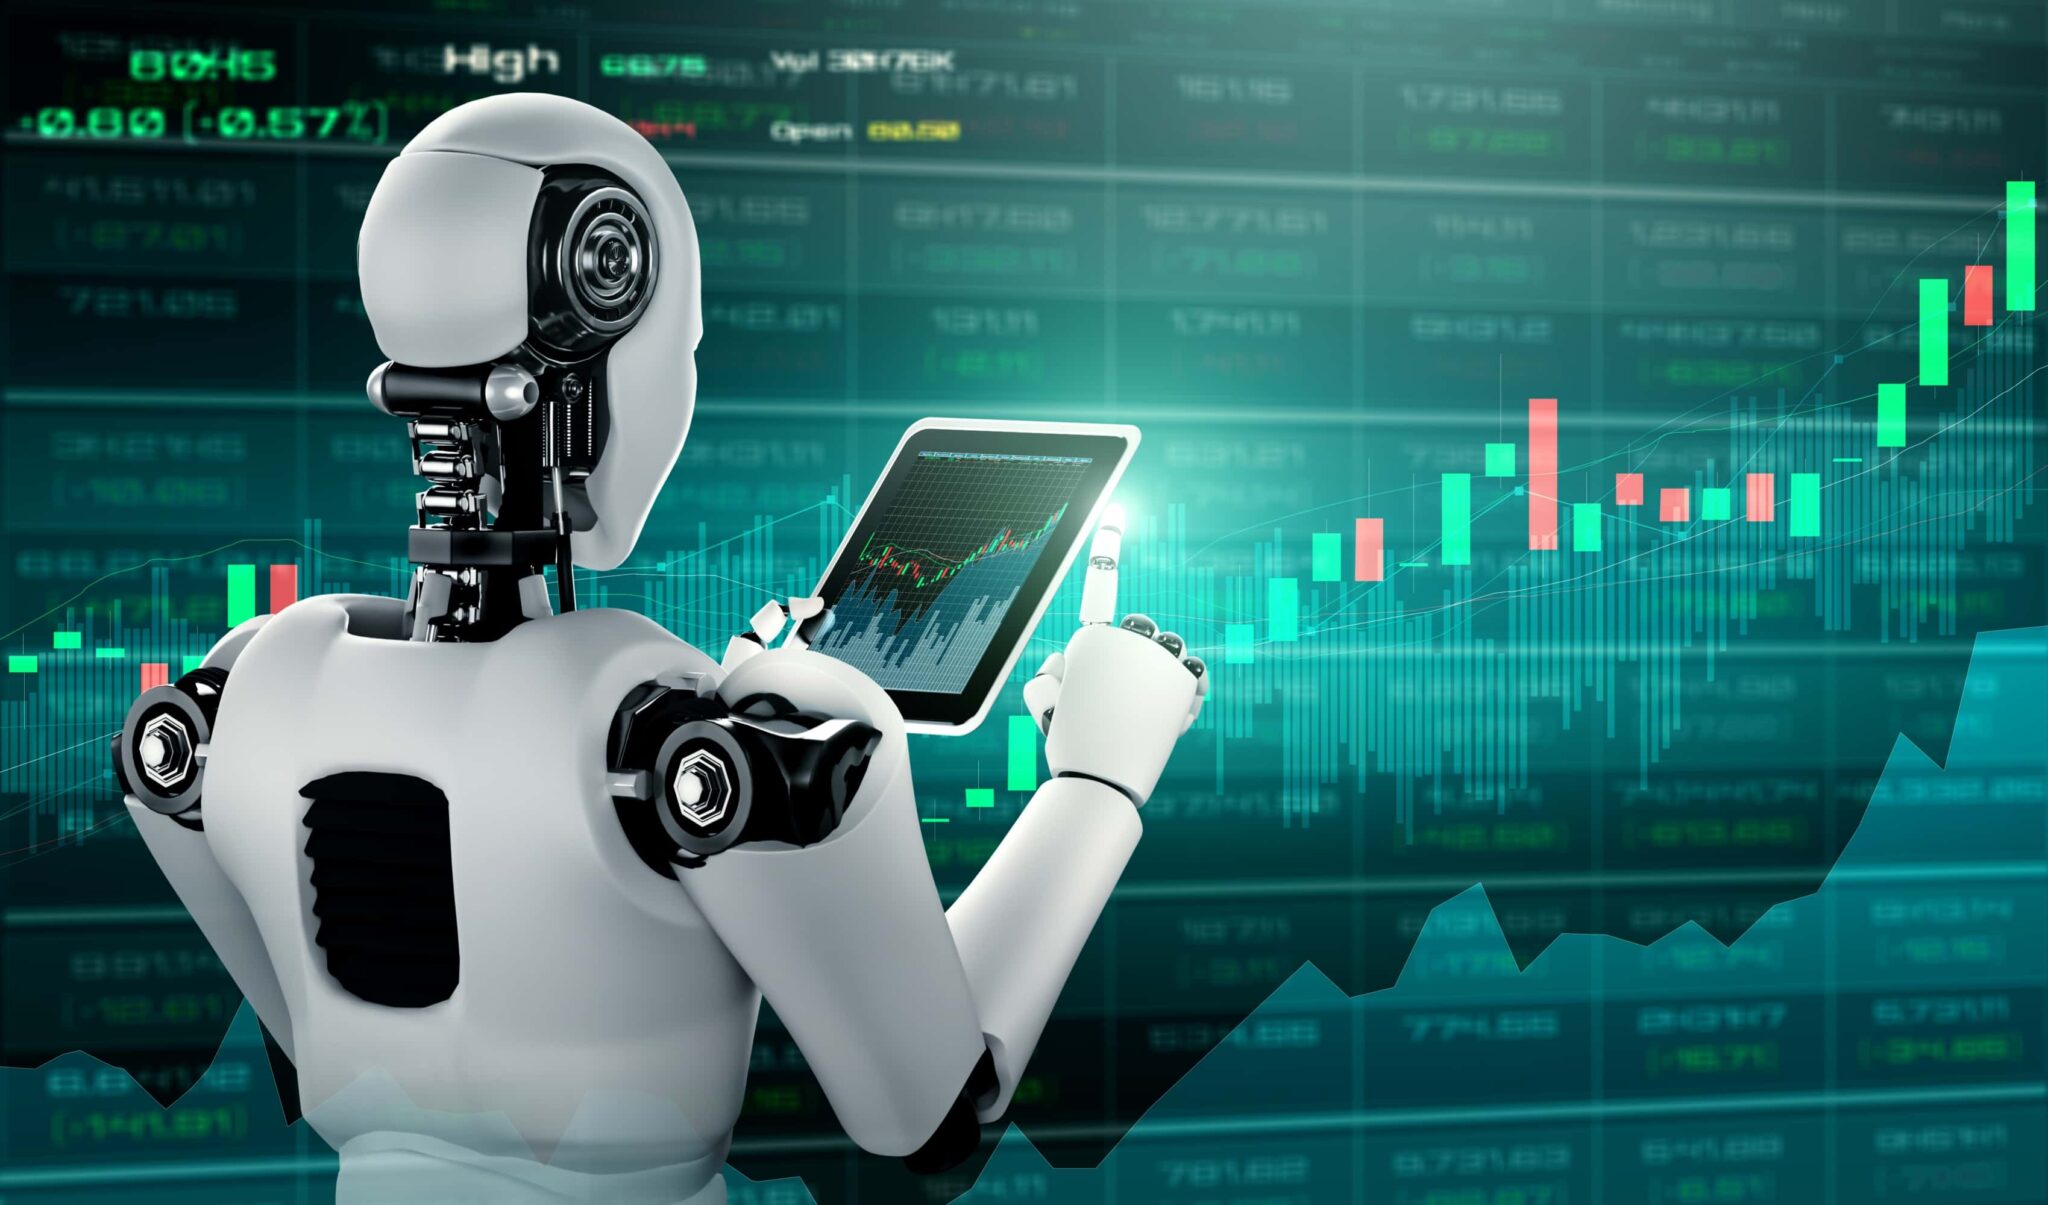 Buy a robot on forex forex patterns and probabilities pdf reader